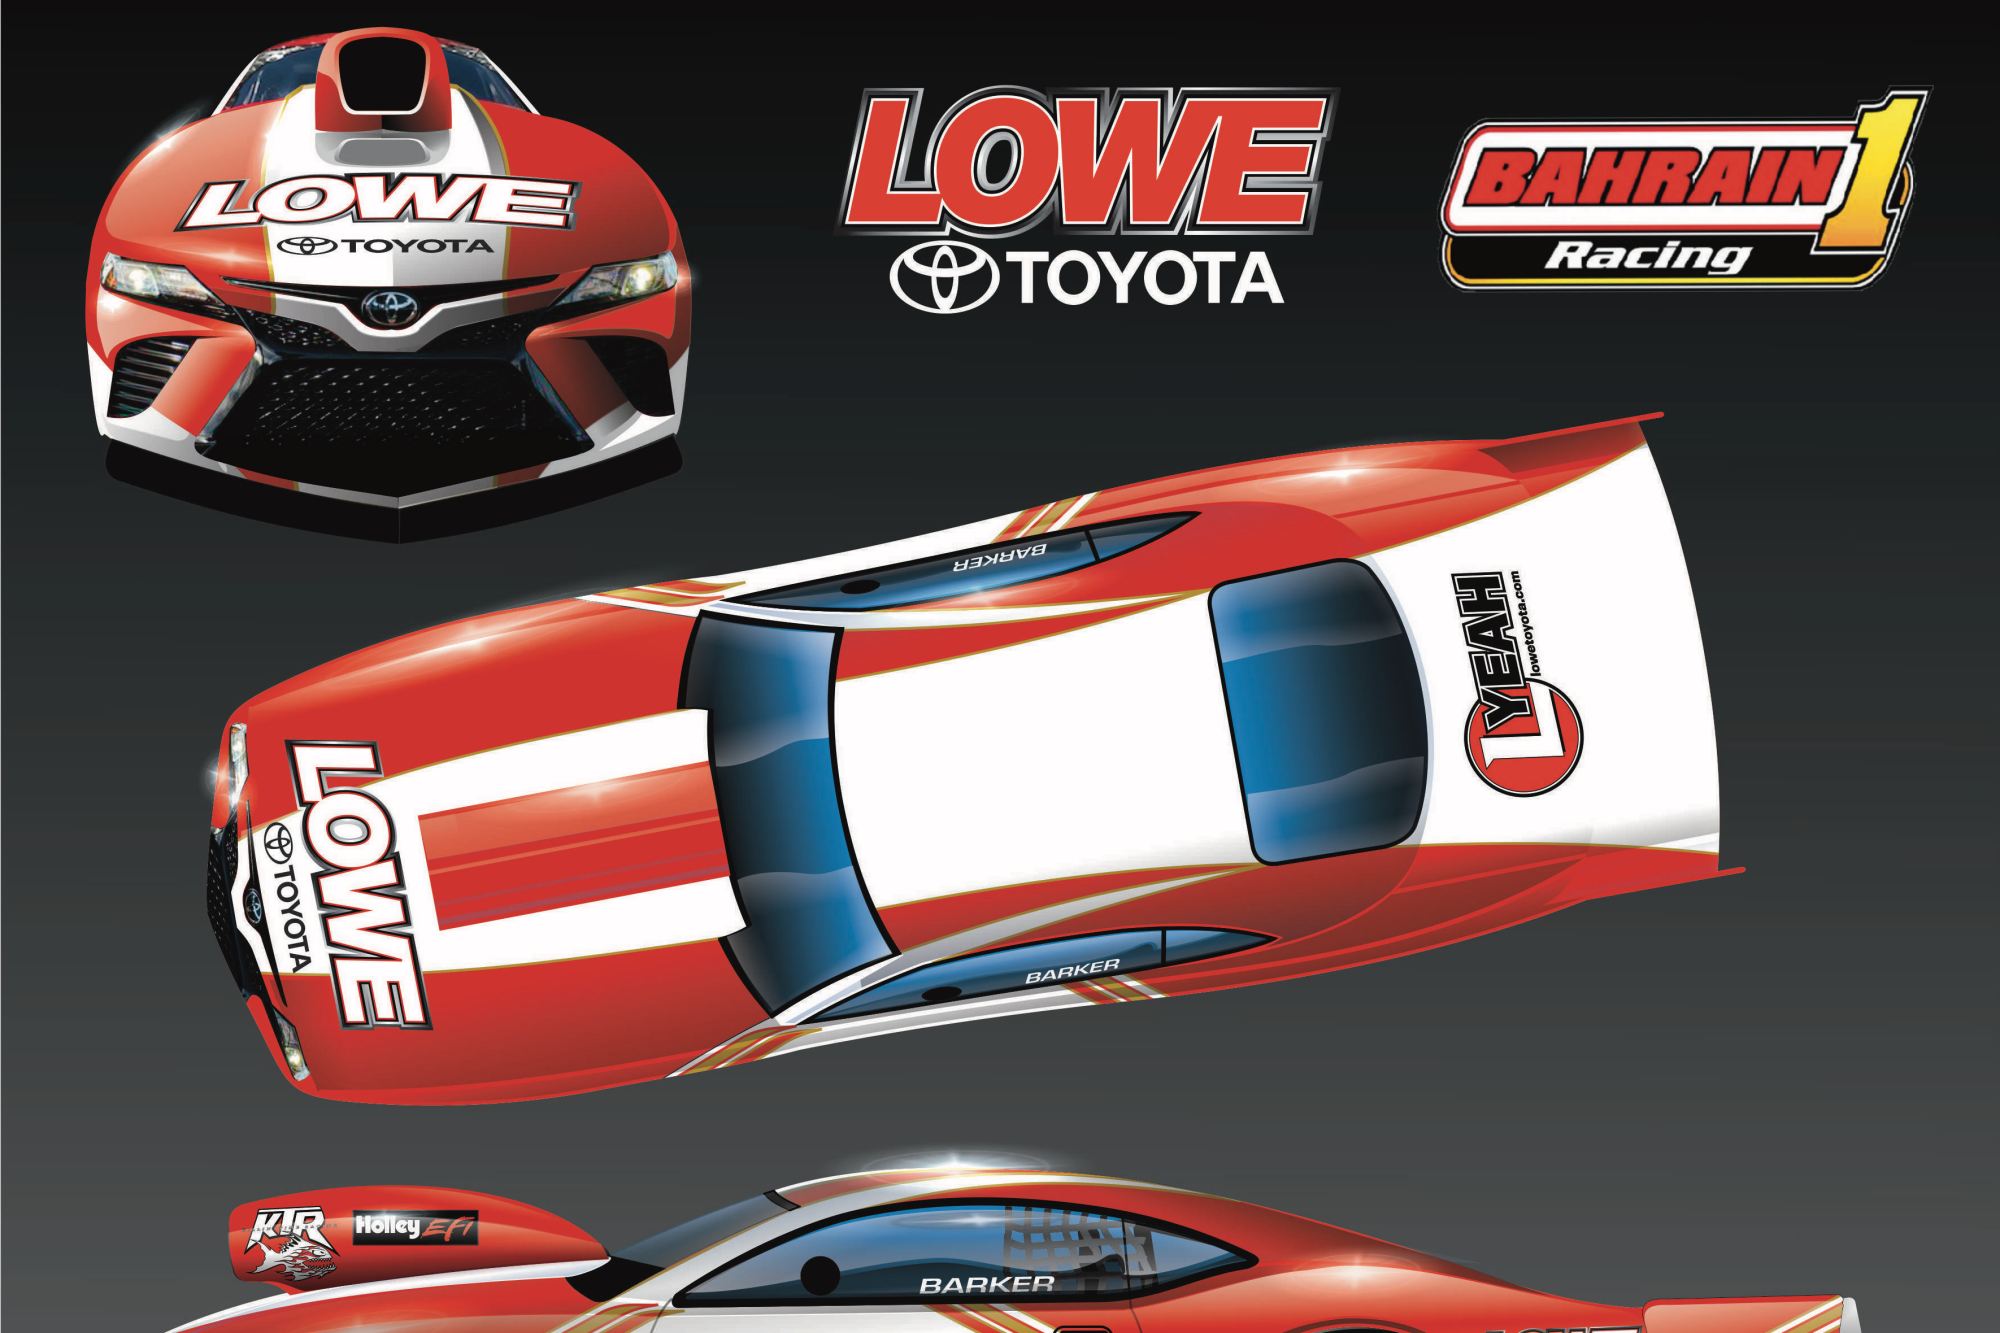 Top Sportsman Jeffrey to Run New-Look Bahrain 1/Lowe Toyota Camry in NHRA Pro - Drag Illustrated | Drag Racing News, Opinion, Interviews, Photos, Videos and More